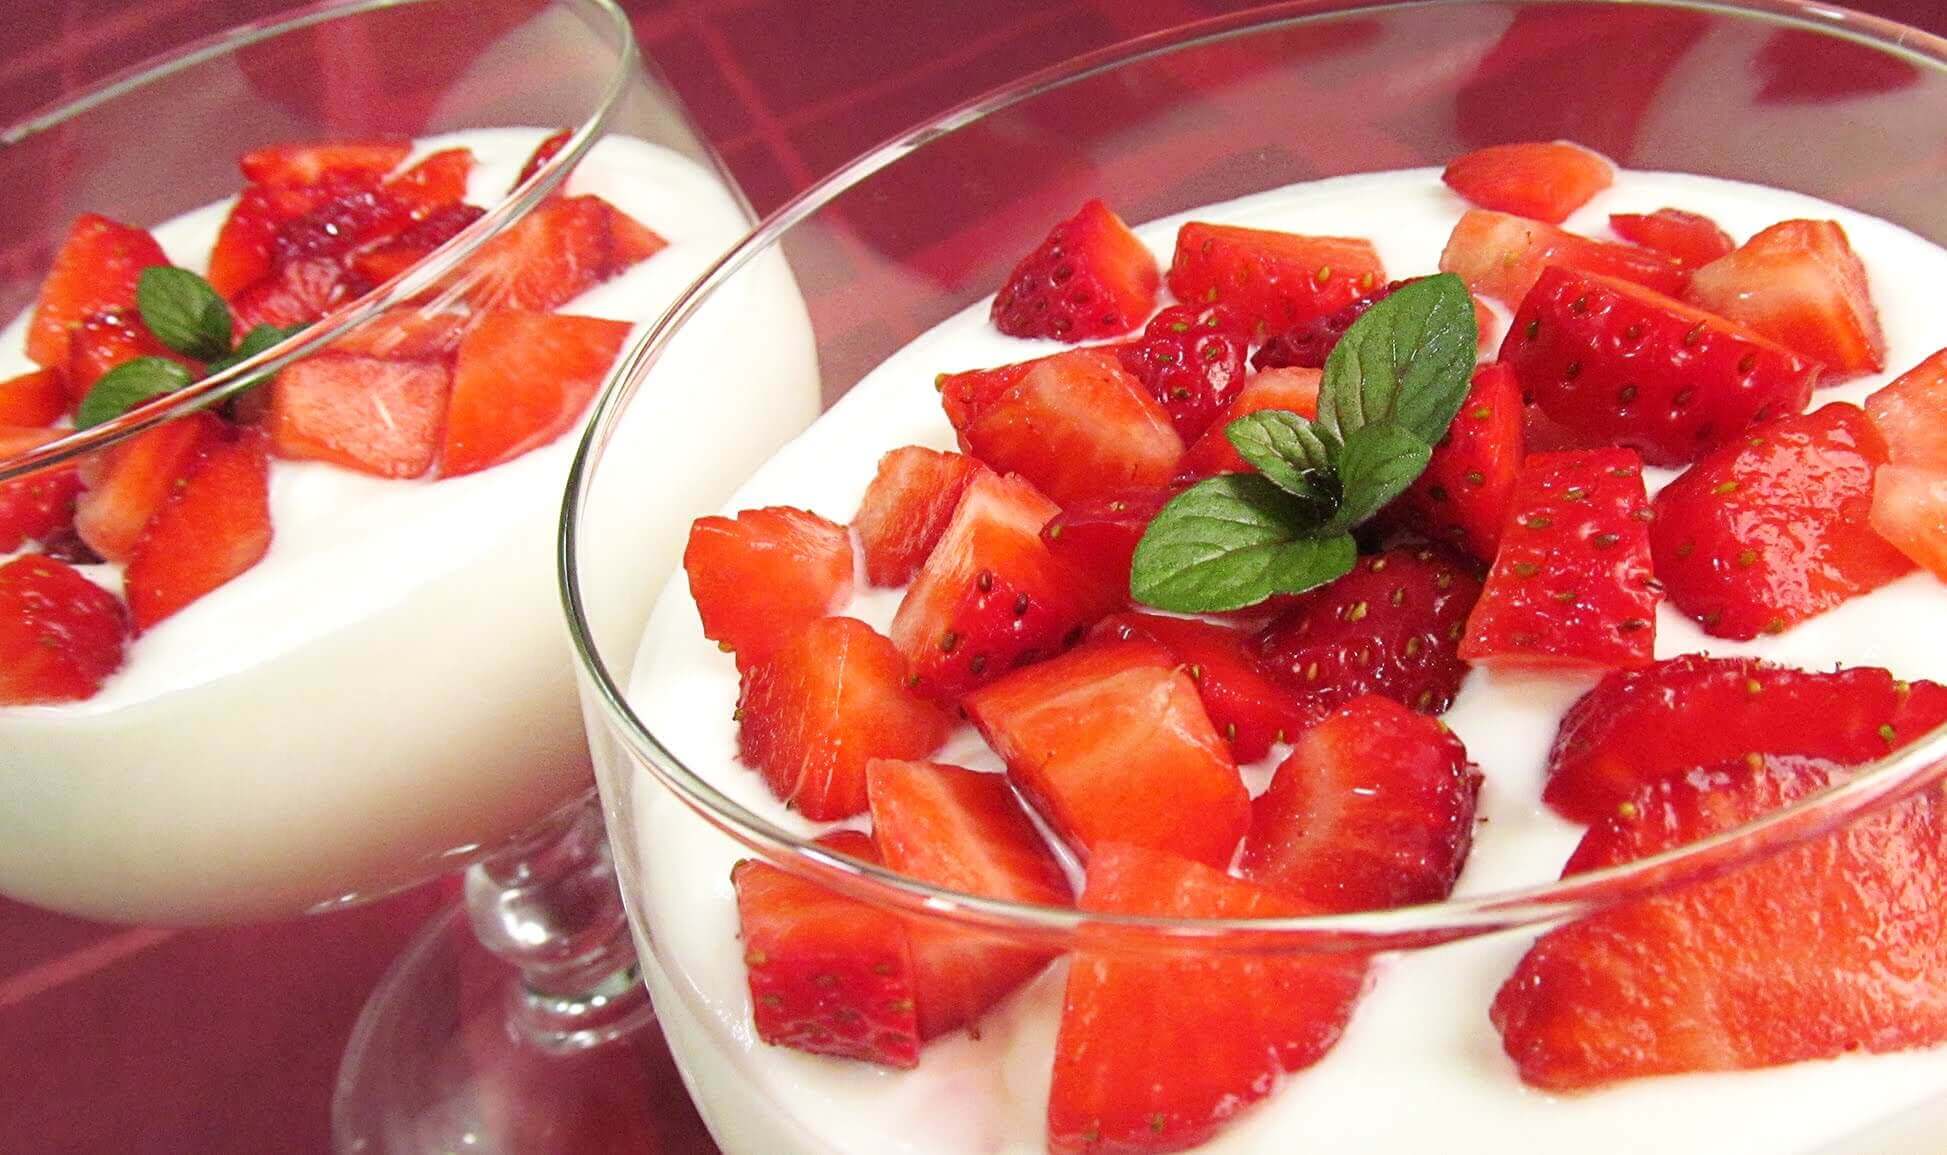 Some strawberries and cream is one of many breakfast ideas.